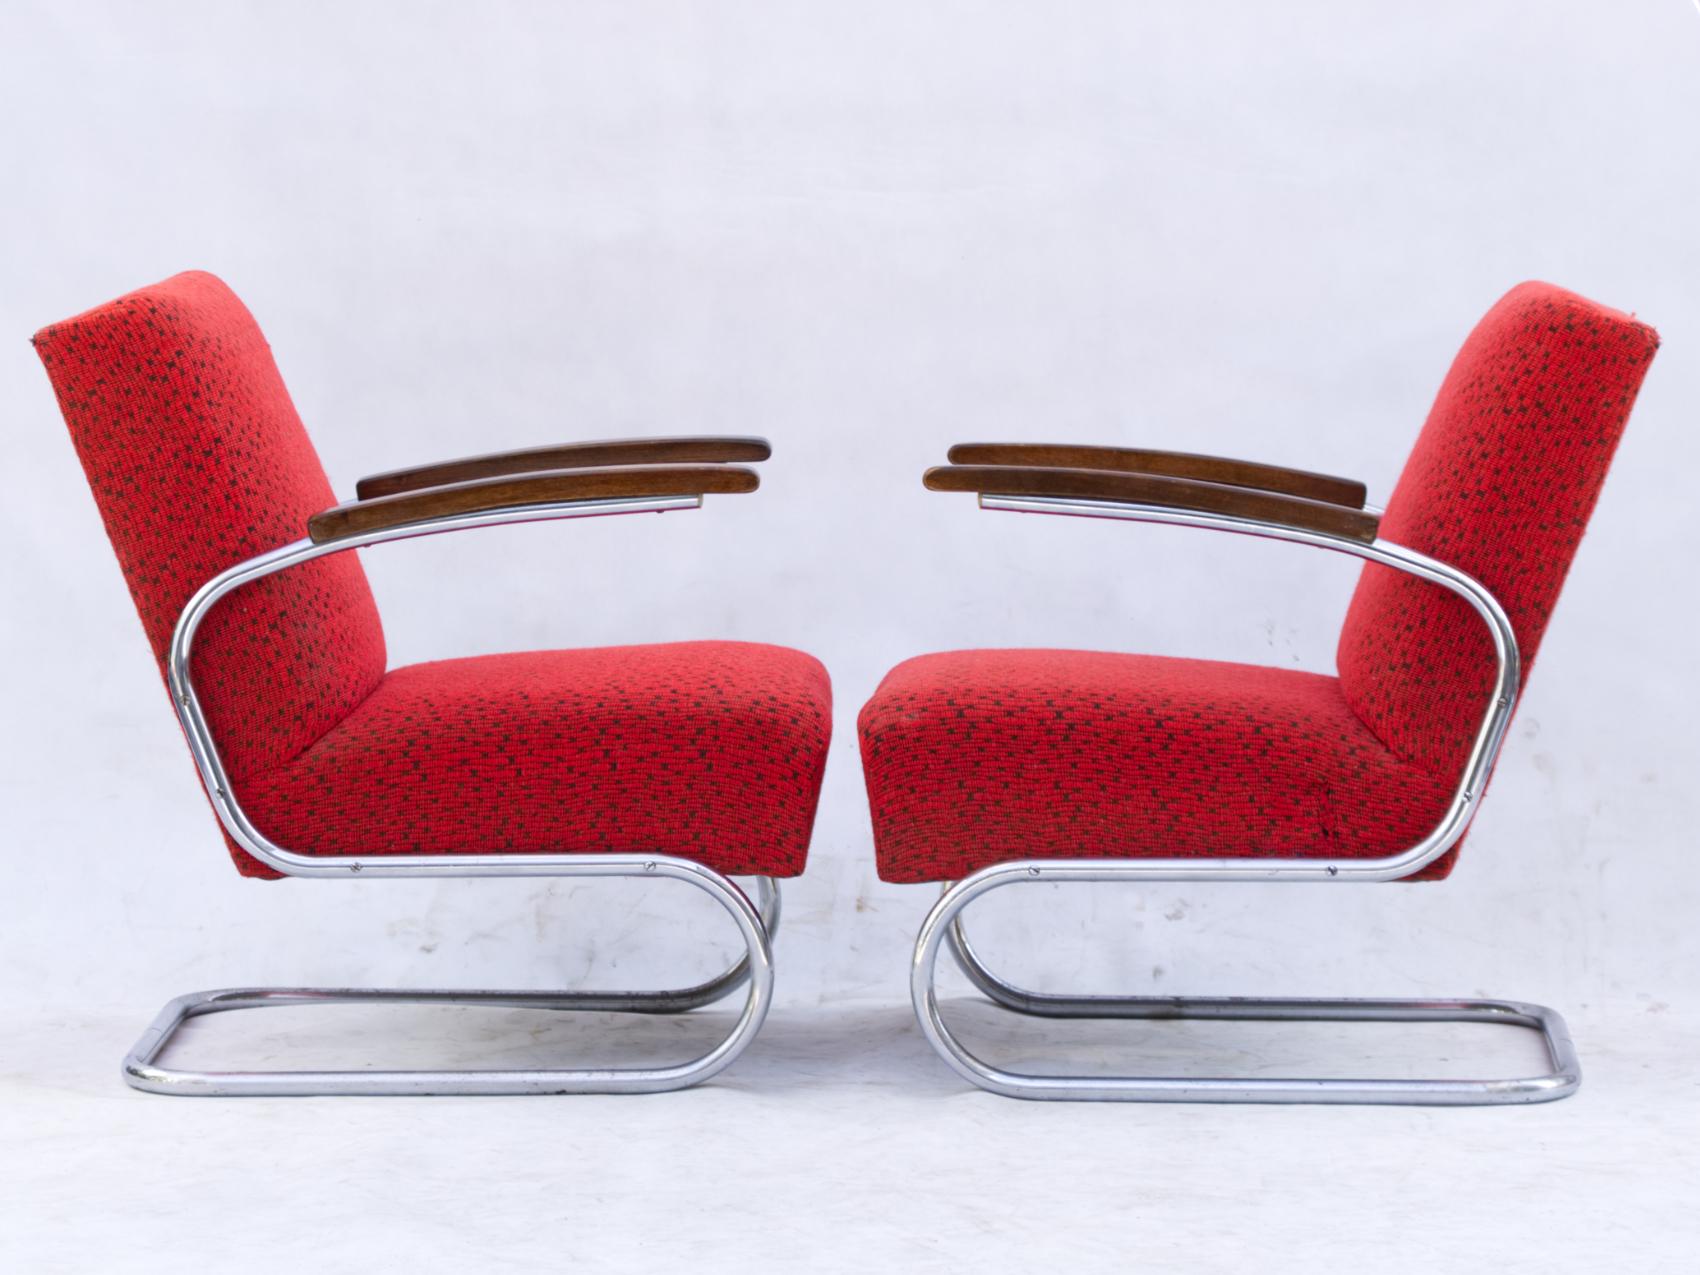 Pair of model armchairs, model S411 by Thonet circa 1930s Bauhaus period. Upholstery and nickel-plated tubular steel construction in original condition. The chrome at the bottom is lightly corroded in some places, but at its age they are in very